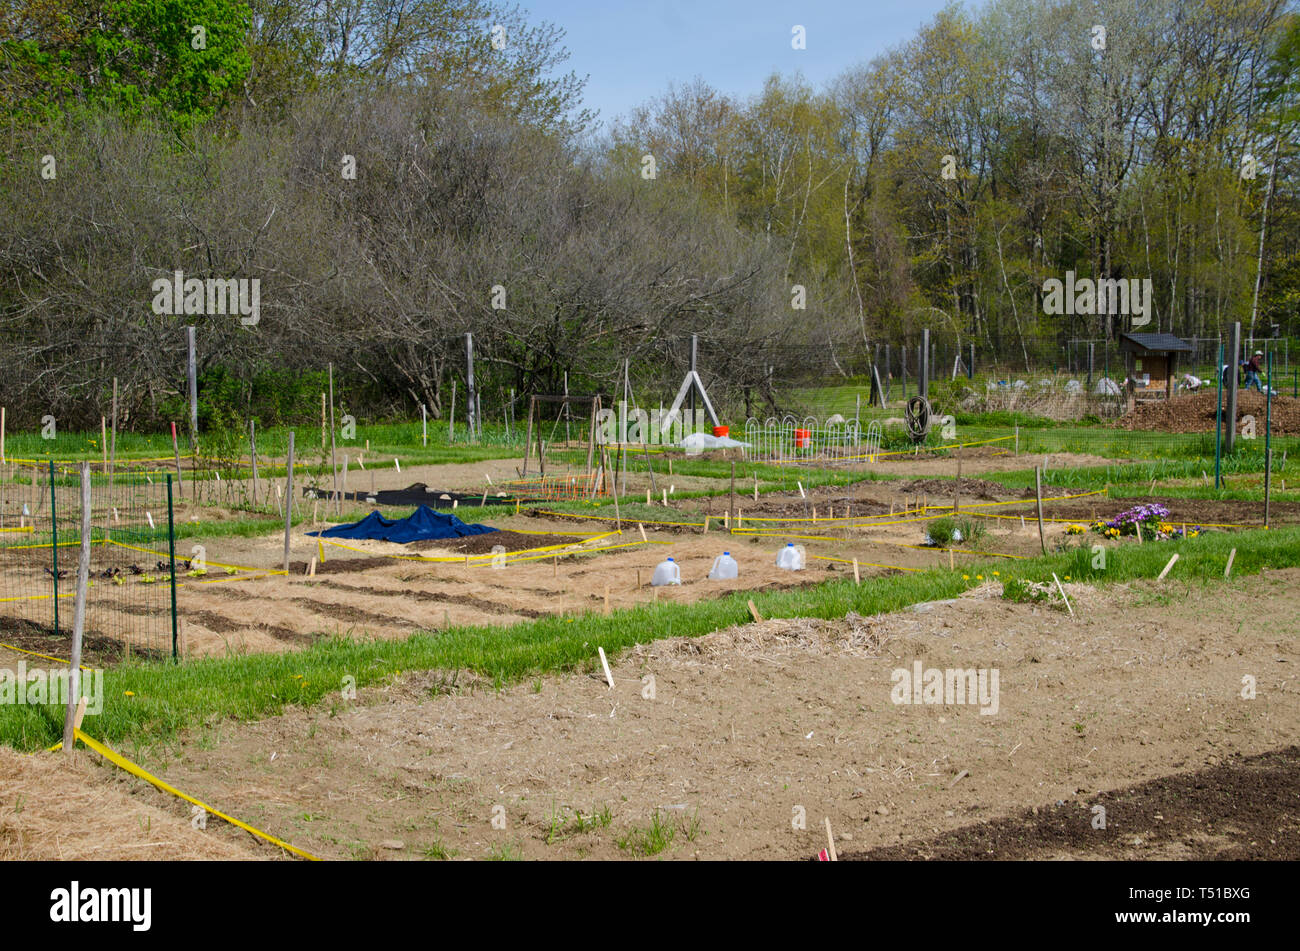 Large community garden of rental plots, or allotments, in early spring, Yarmouth Community Garden, Maine, USA Stock Photo